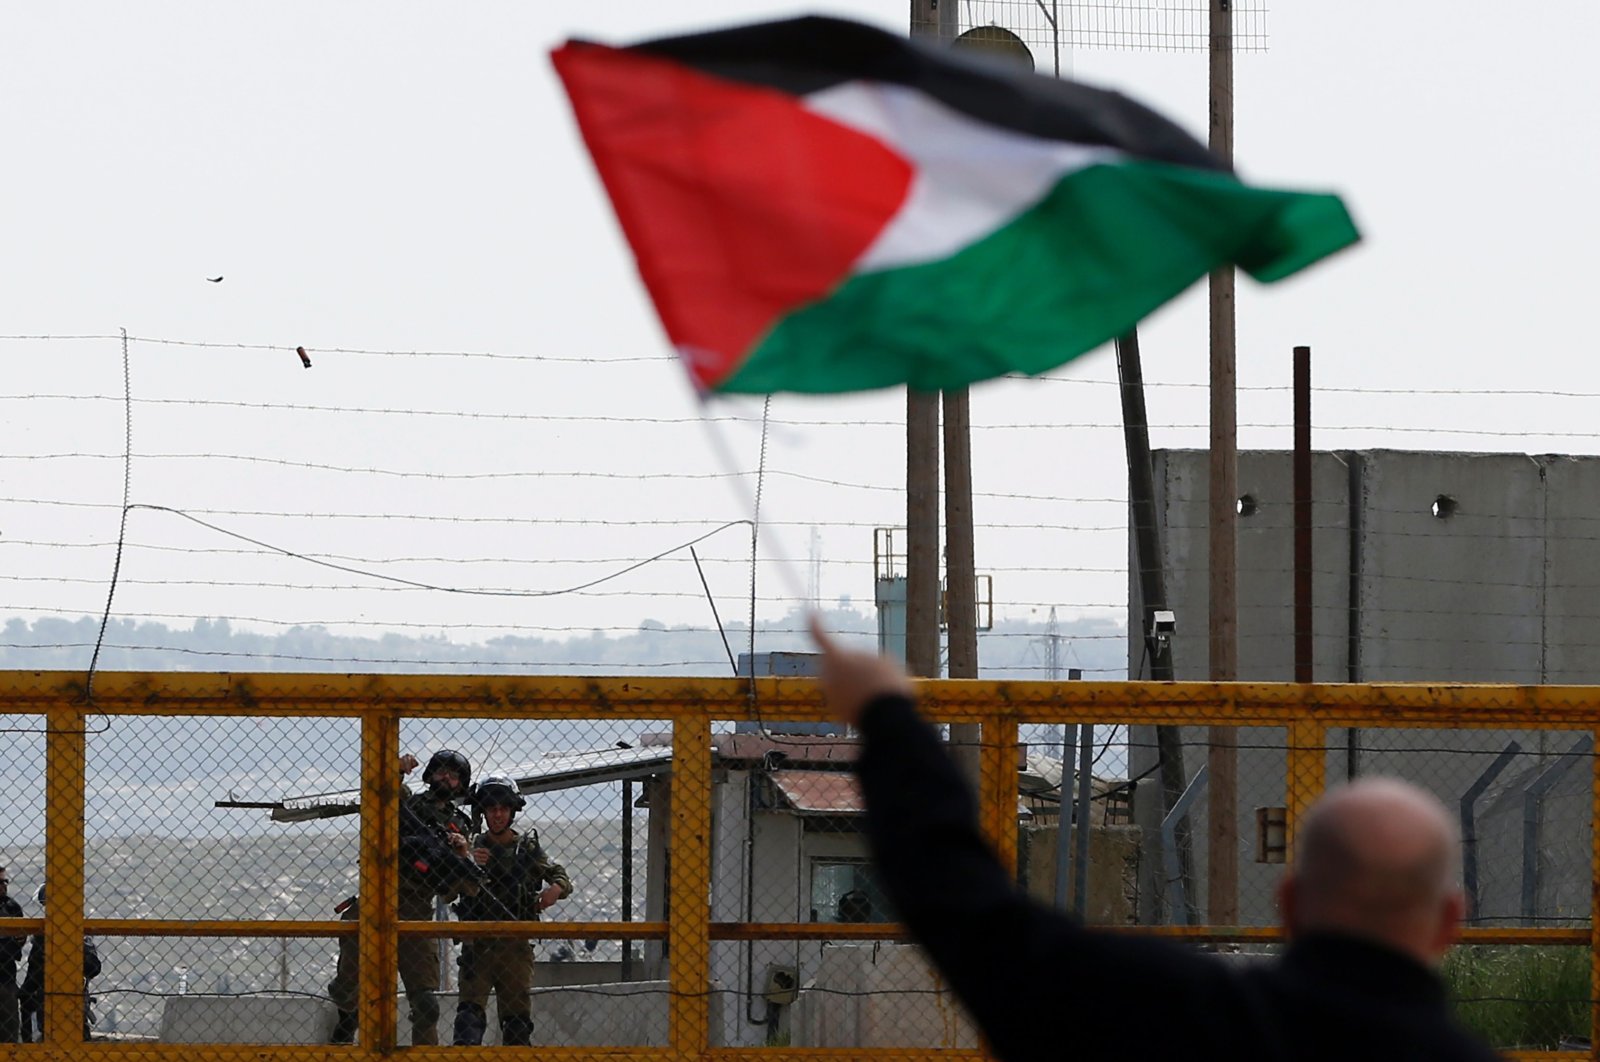 A Palestinian protester waves his national flag in front of Israeli security forces as they mark Land Day outside the compound of the Israeli-run Ofer prison near Betunia in the Israeli occupied West Bank, March 30, 2016. (AFP Photo)